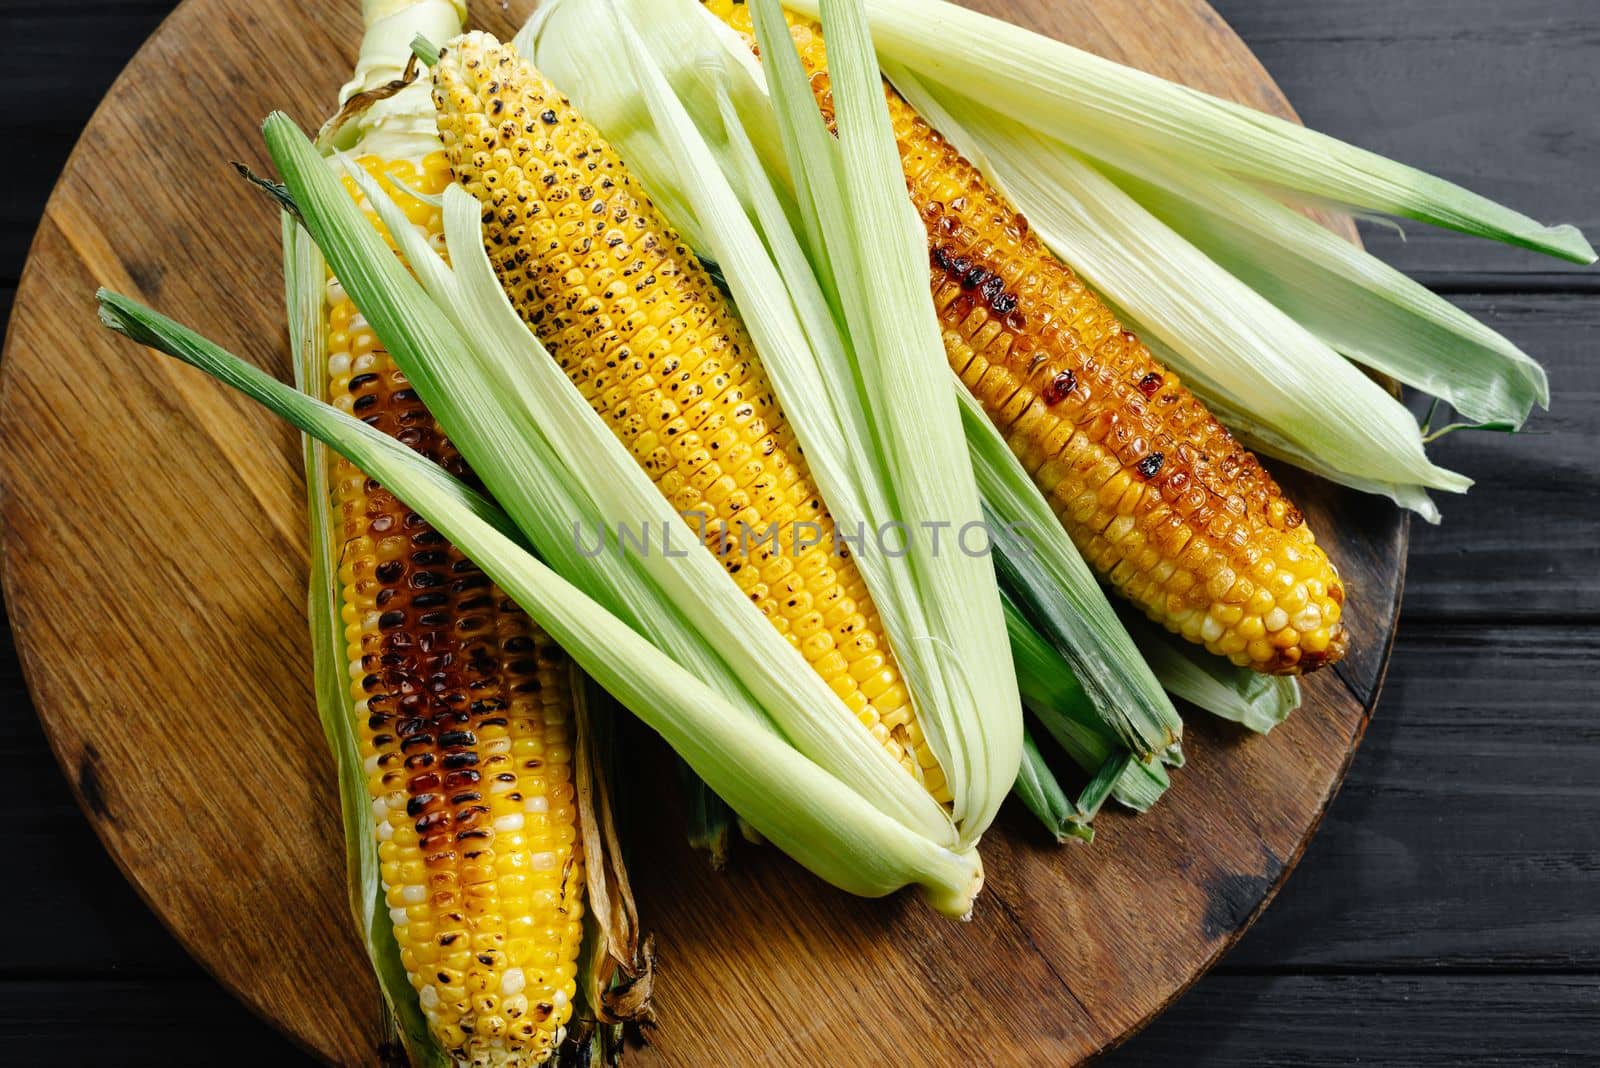 A cauldron of corn roasted over charcoal on a wooden board. Whole corn cobs by gulyaevstudio